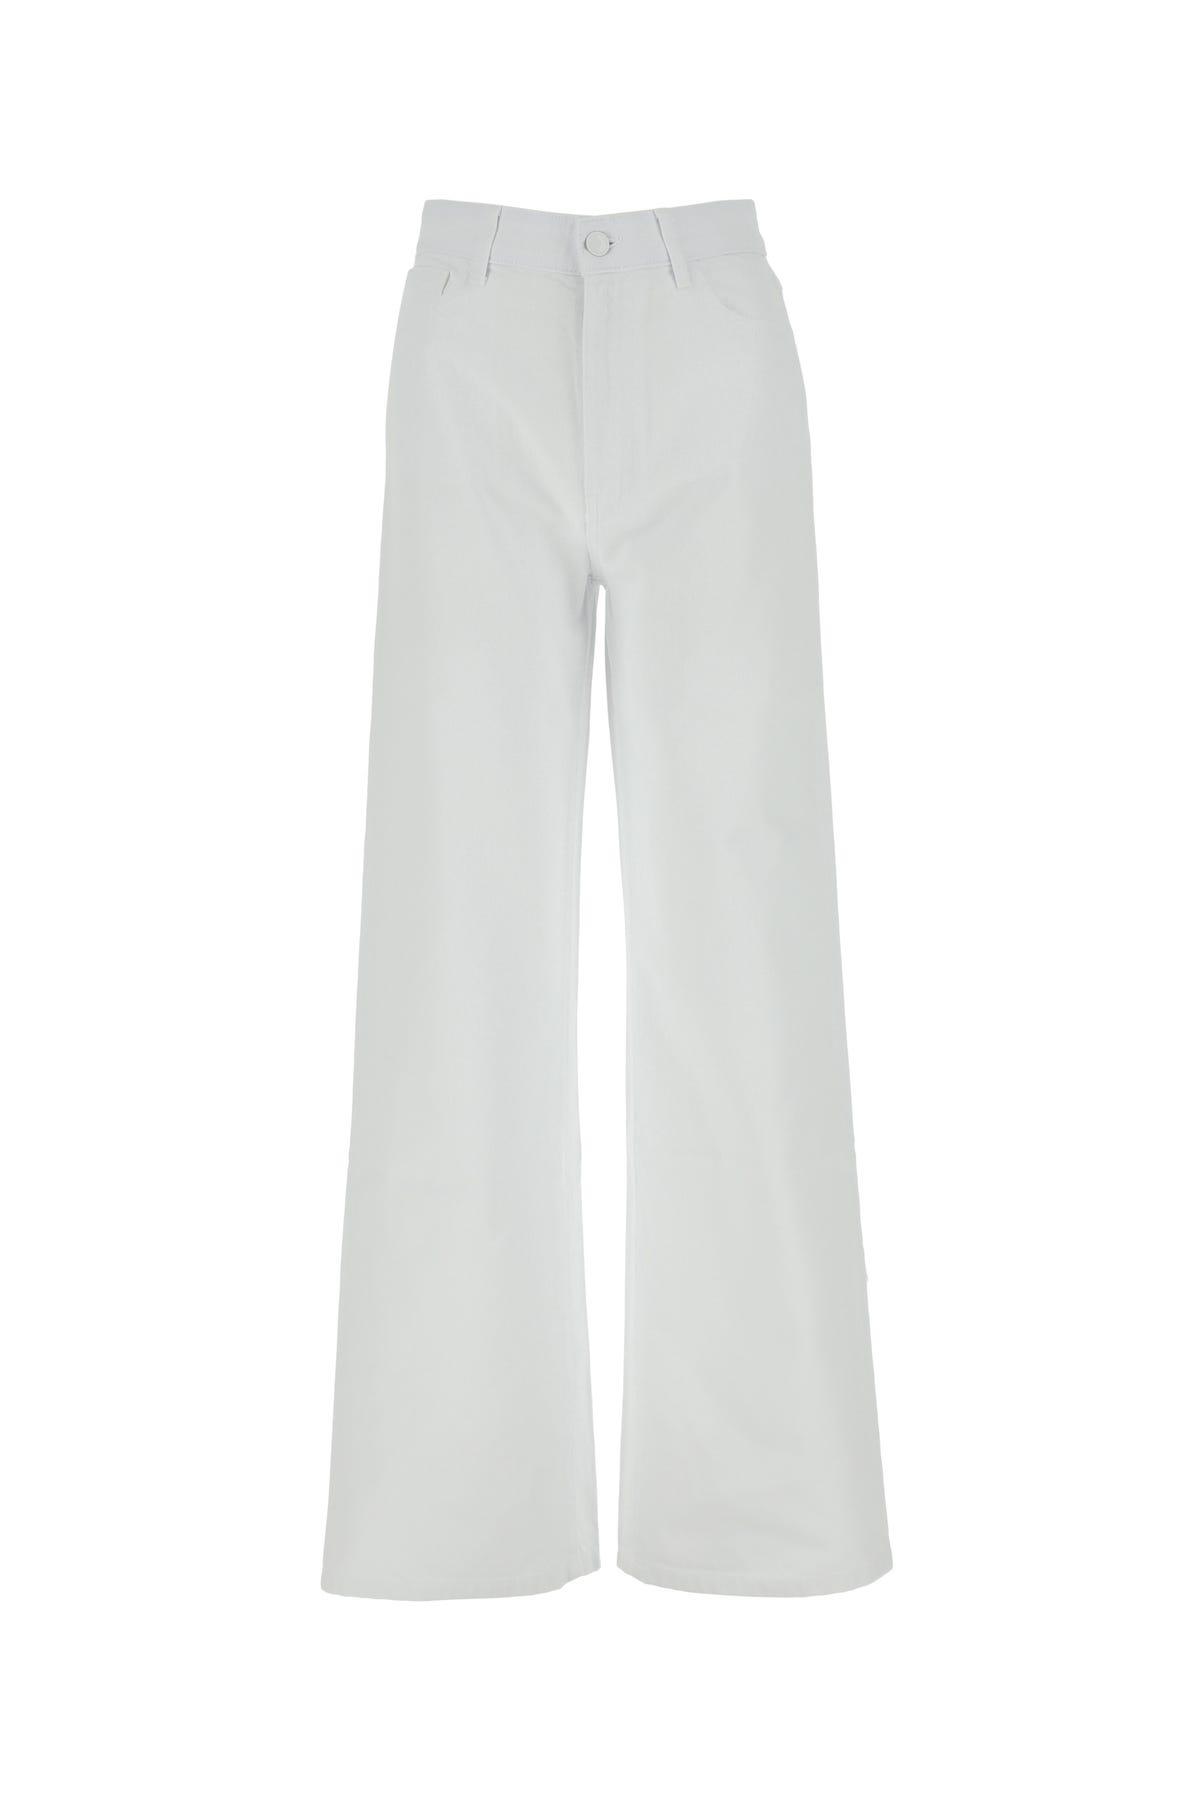 Raf Simons Jeans in White | Lyst